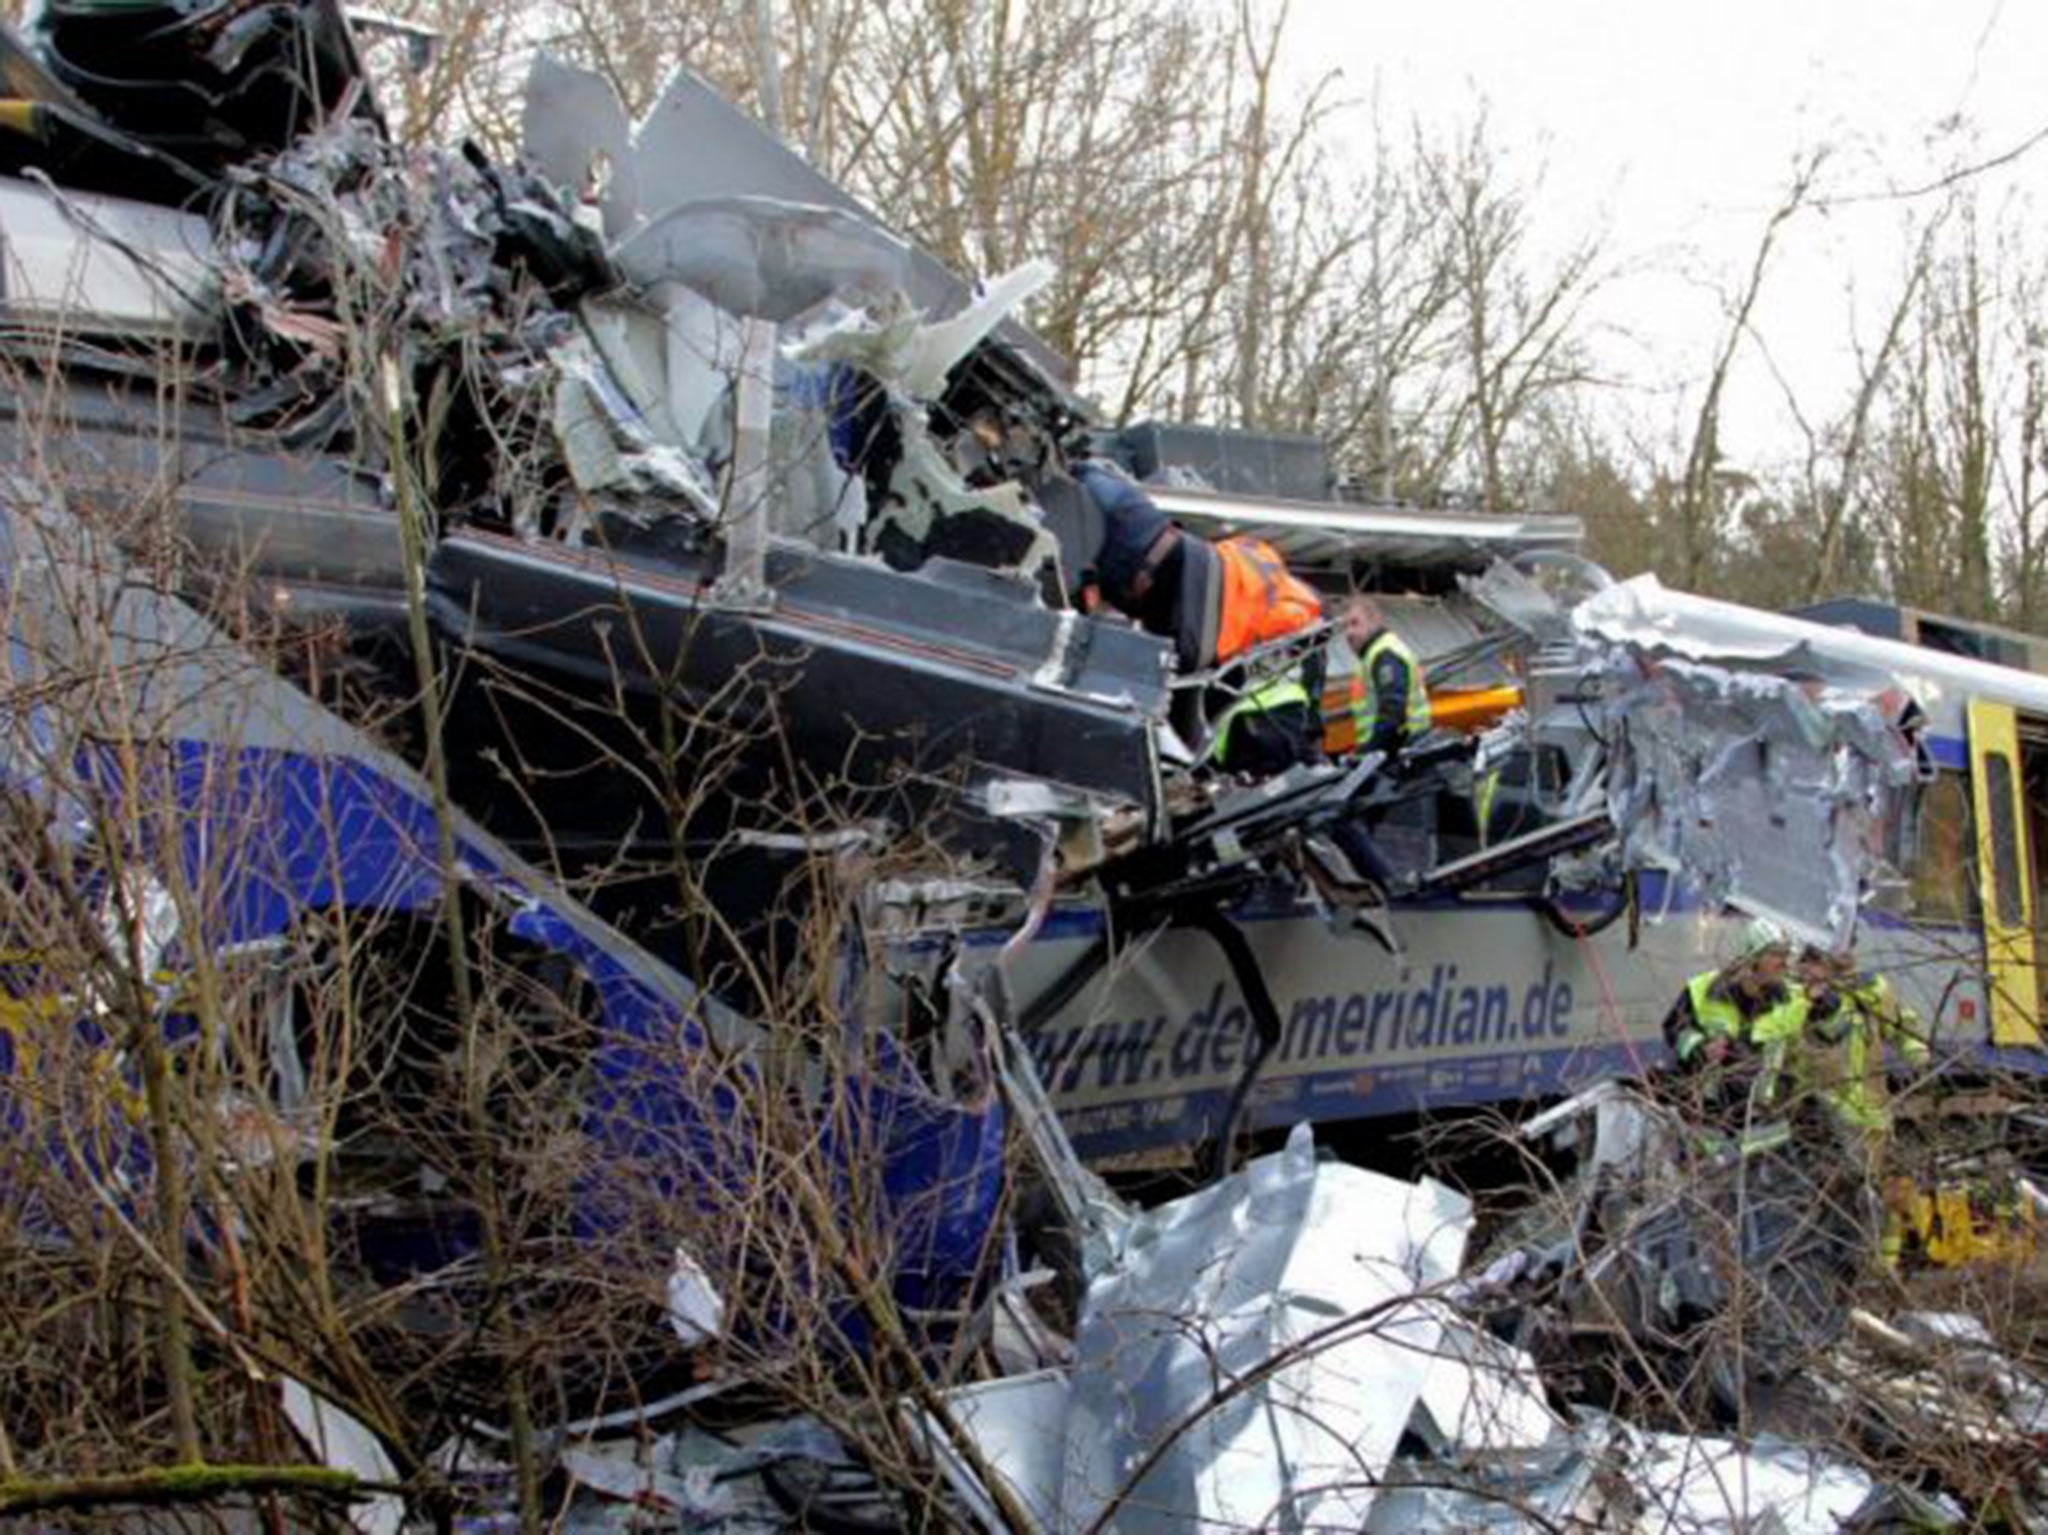 Rescue workers at the scene of the train crash near Bad Aibling yesterday